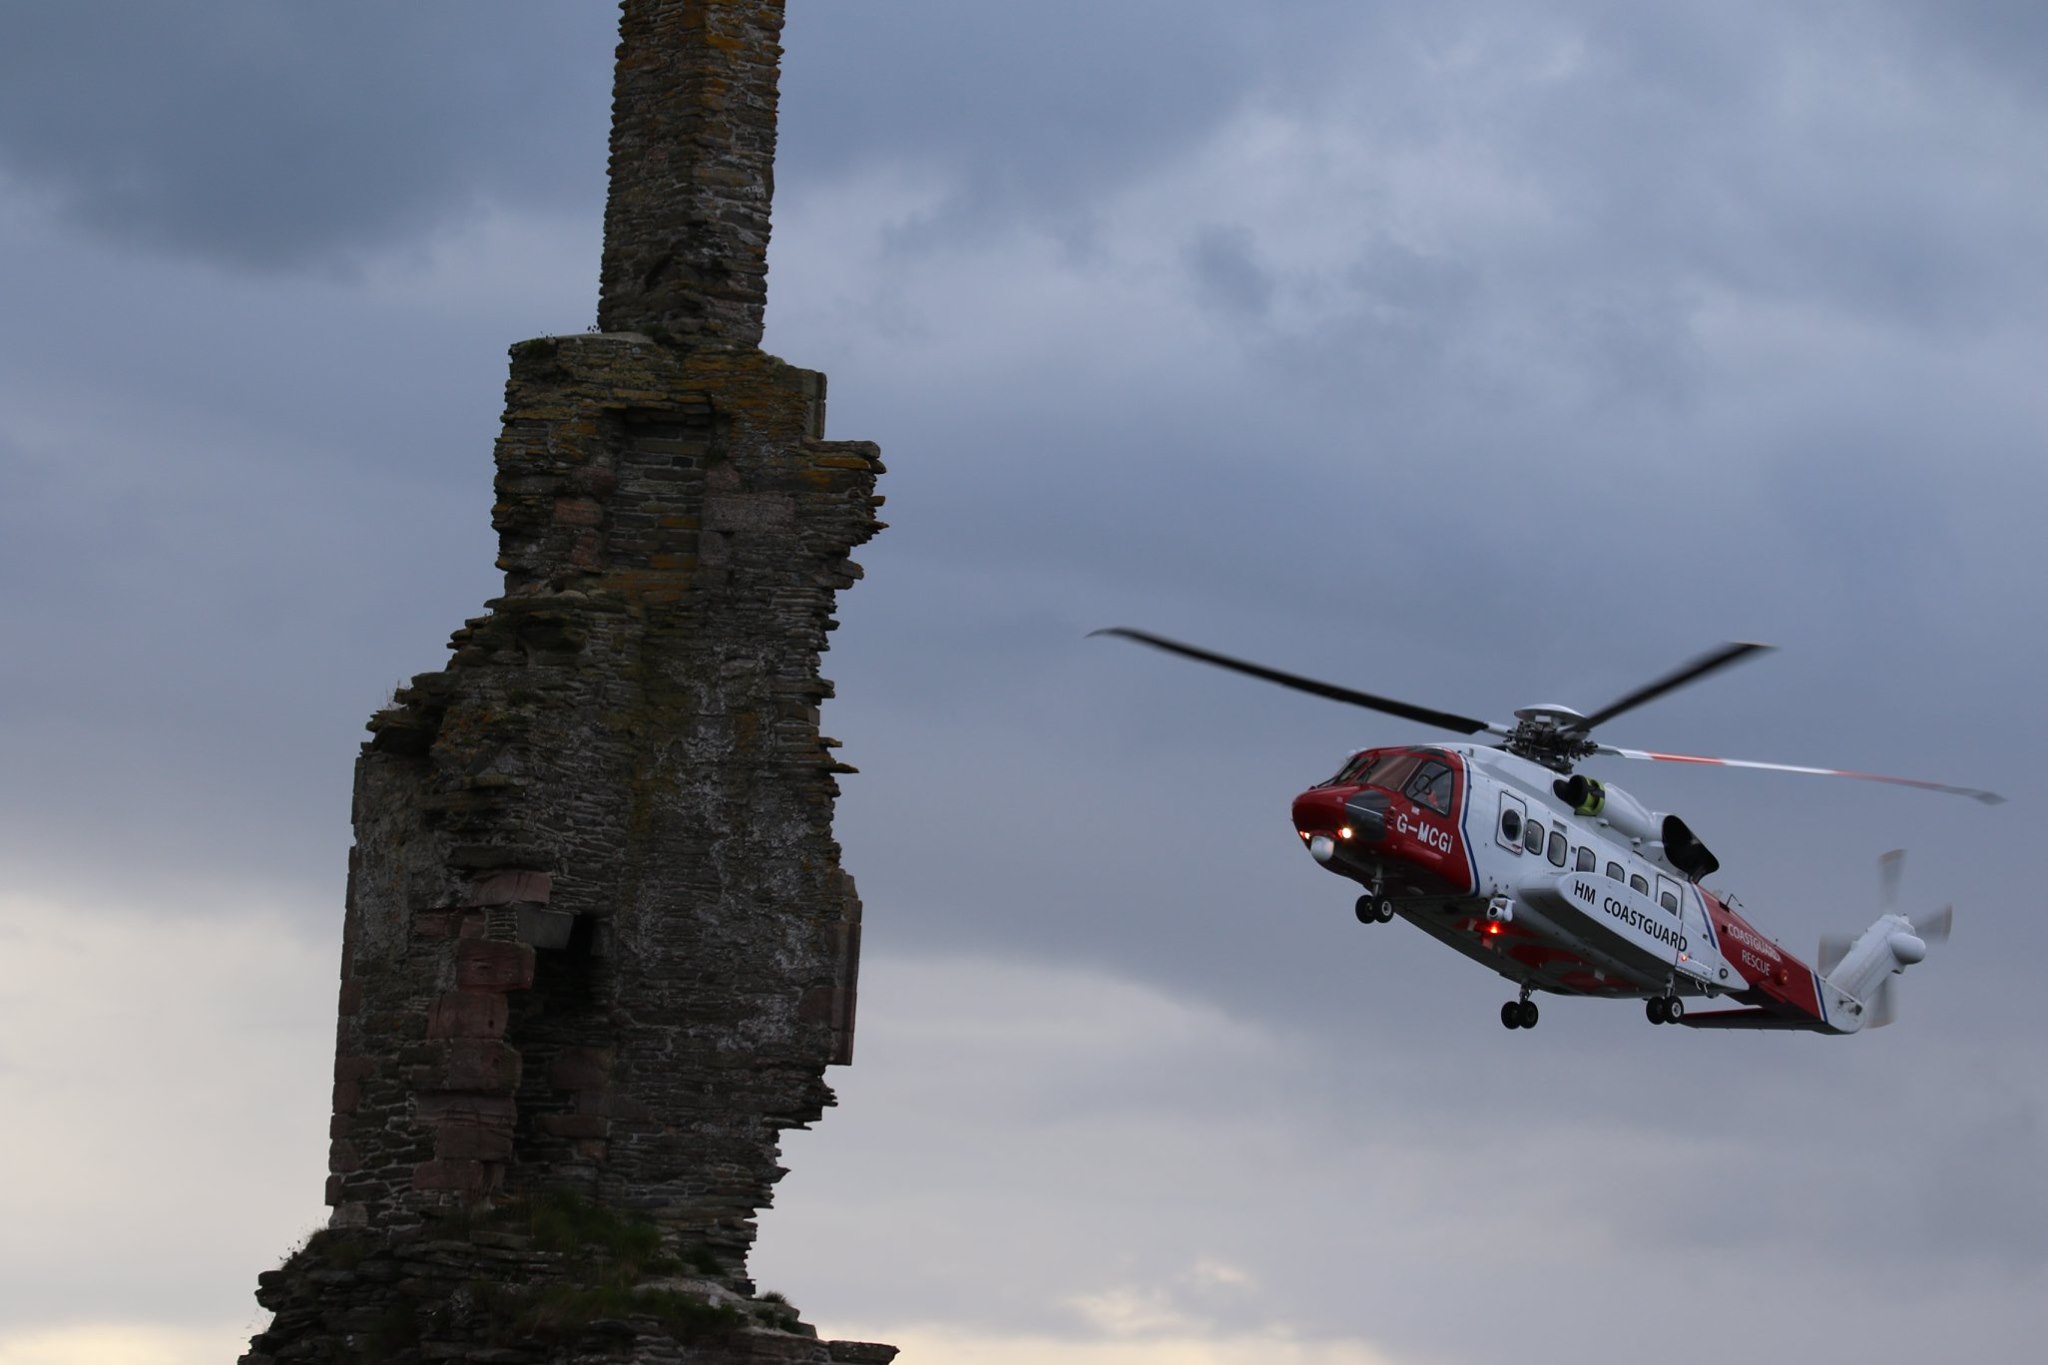 Coastguard helicopter Rescue 900 from Sumburgh airlifted the casualty from Sinclair Castle near Wick